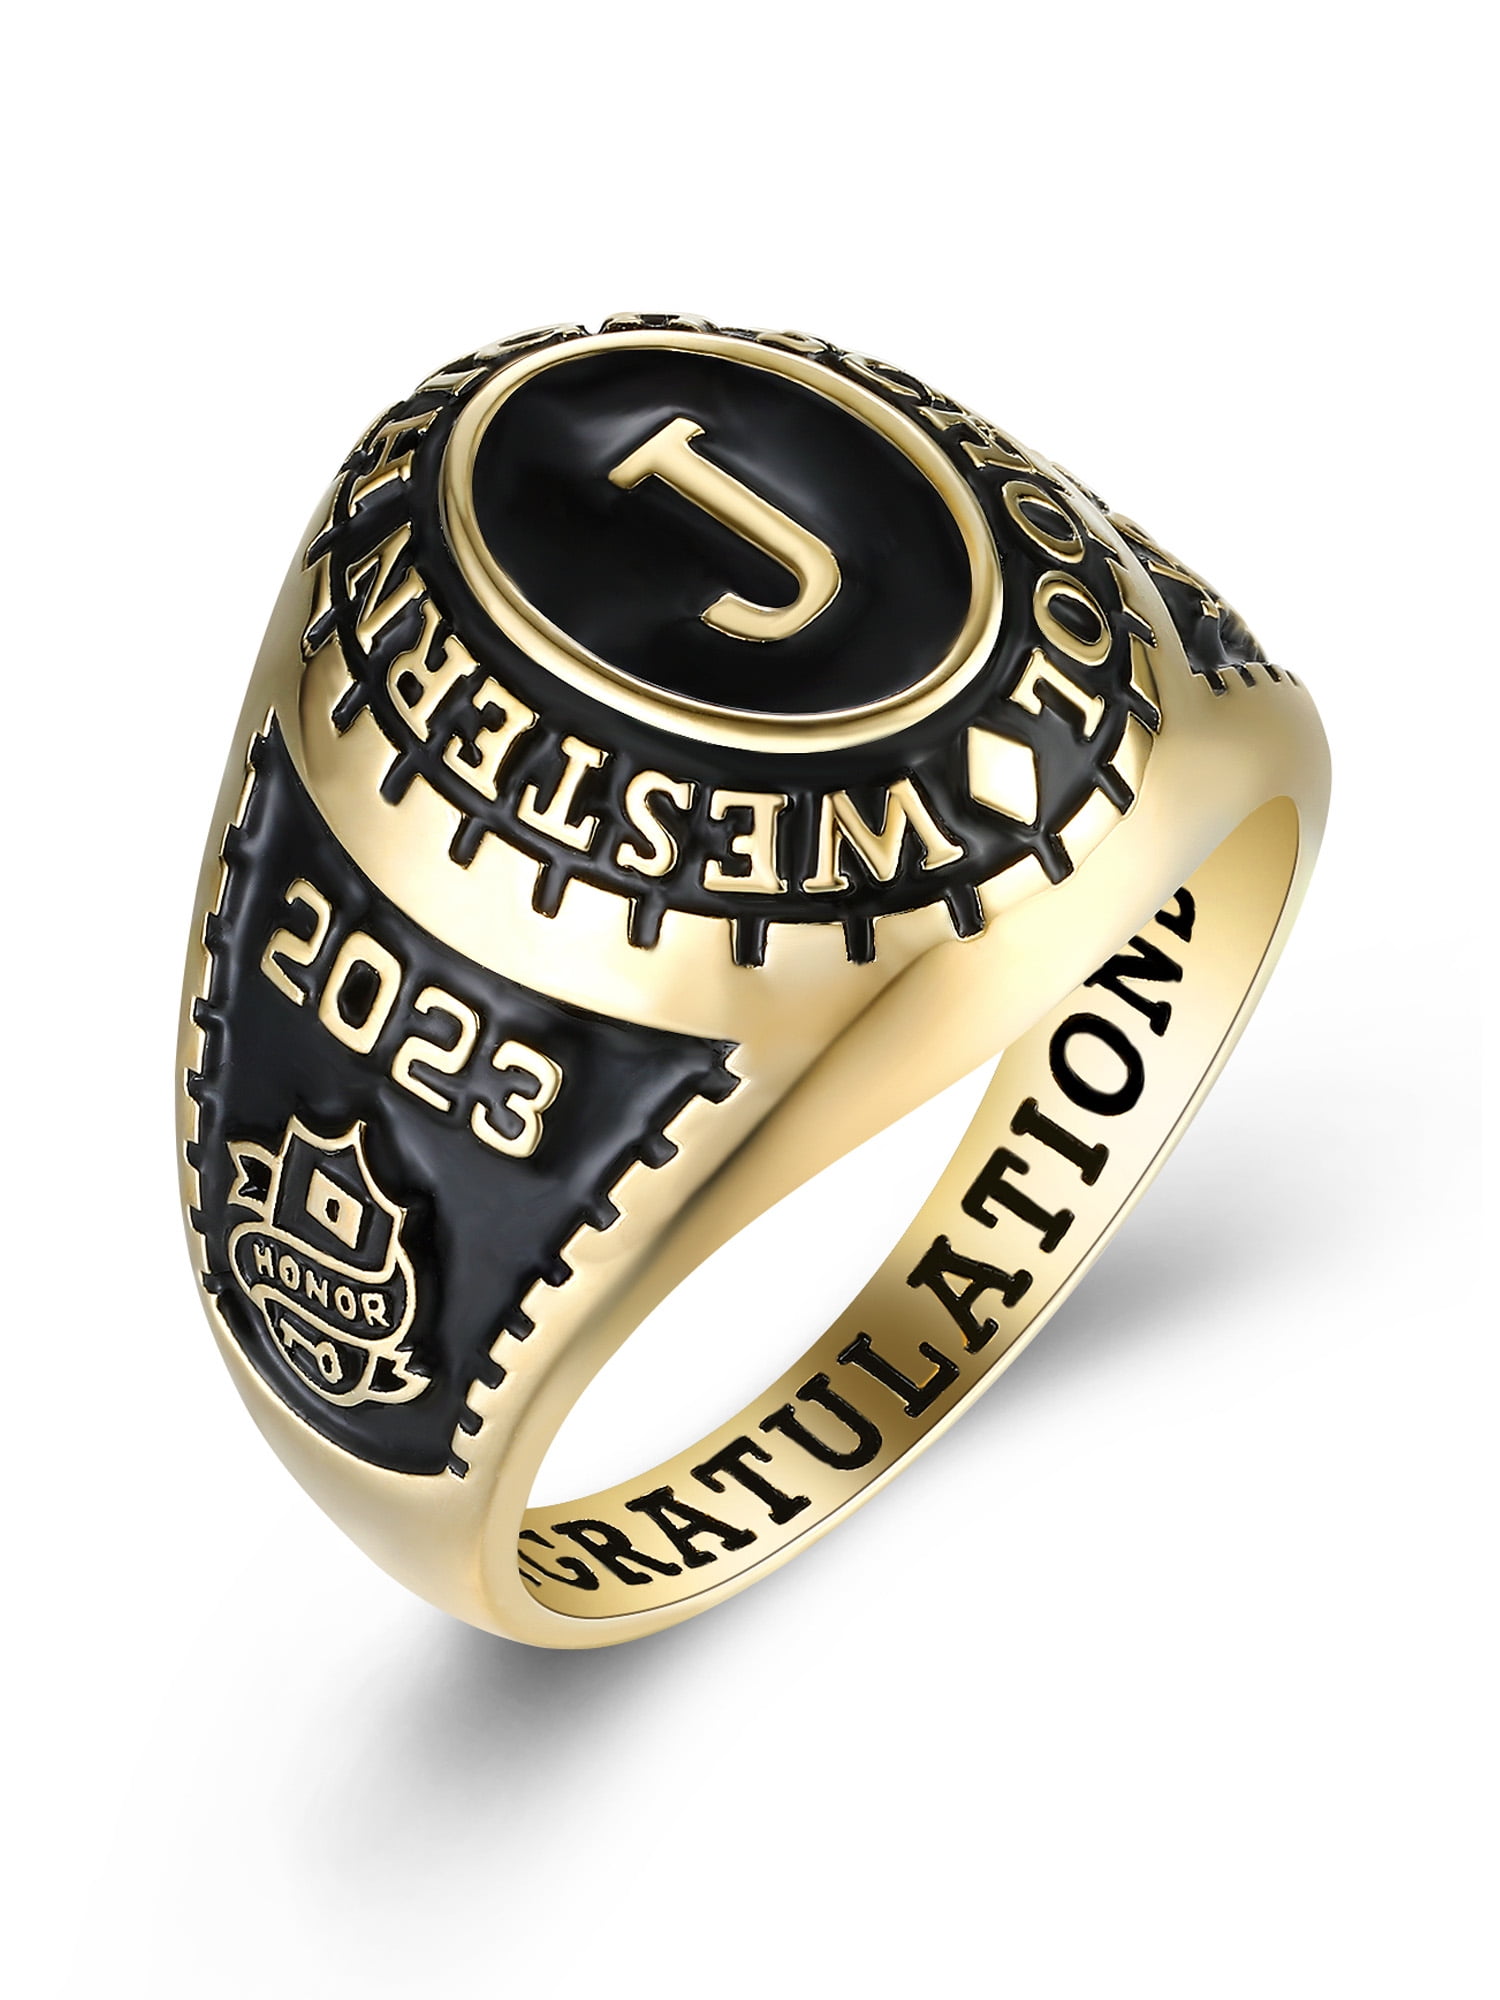 Order Now for Graduation, Freestyle Women's Class Ring in Platinum Plated  Celebrium With CZ , Personalized, High School or College Graduation -  Walmart.com